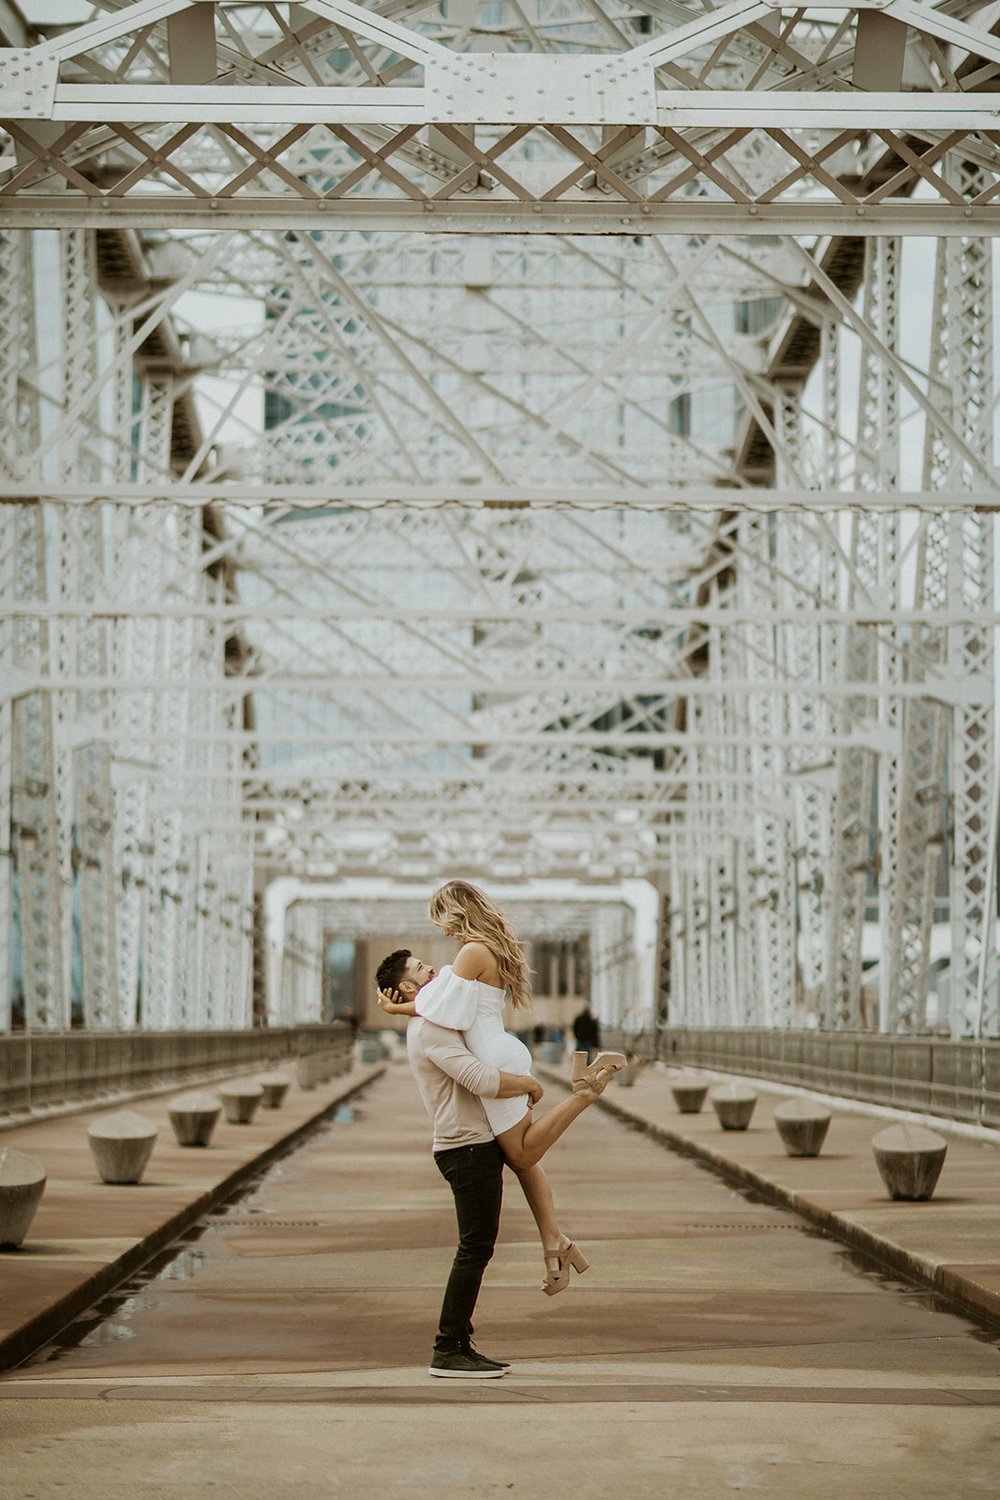 Husband lifts his wife with excitement while on the walking bridge from Downtown Nashville to the suburbs.